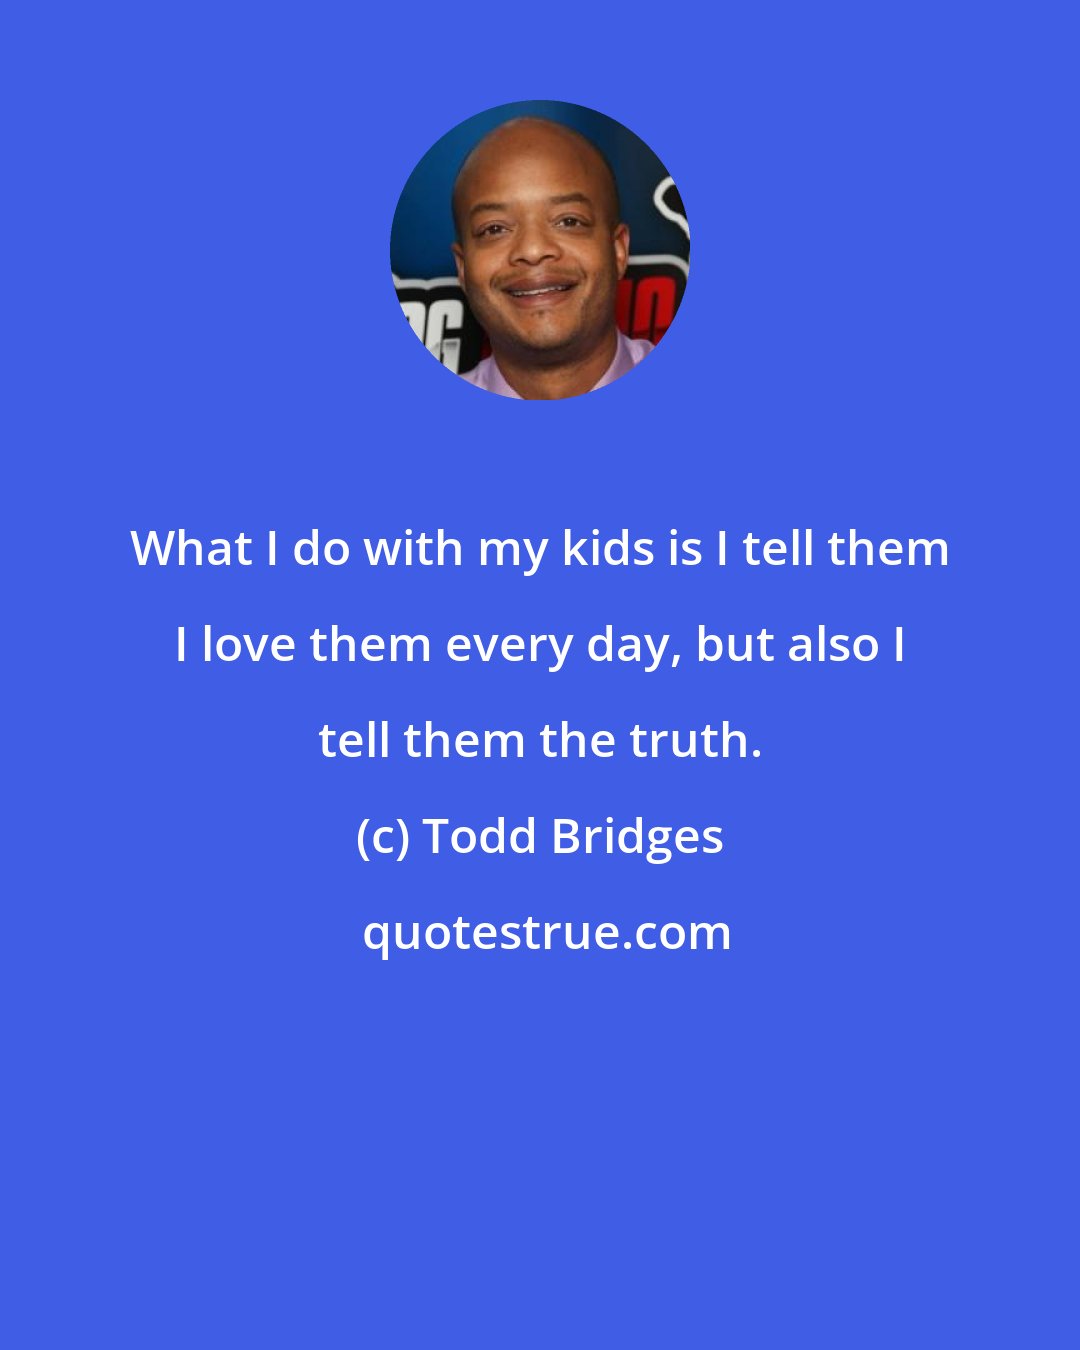 Todd Bridges: What I do with my kids is I tell them I love them every day, but also I tell them the truth.